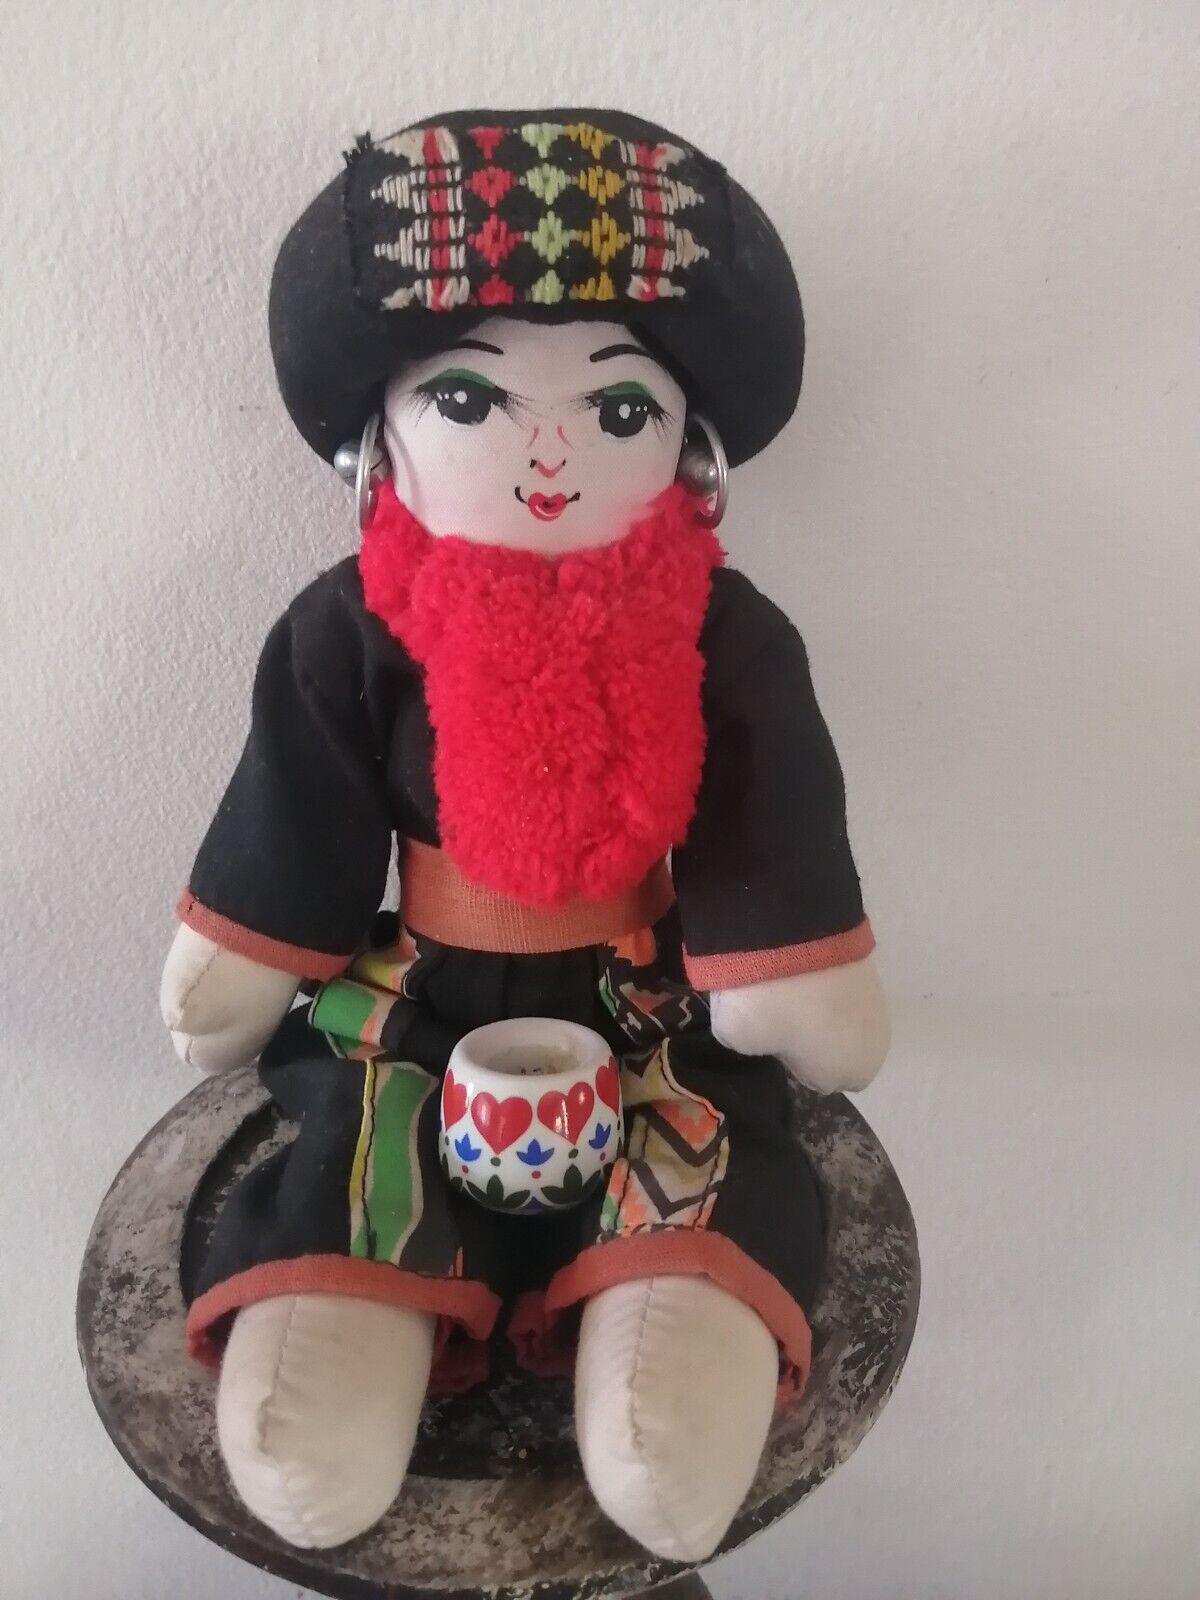 Mongolian Wish Granting Doll, Vintage Traditional Witchcraft